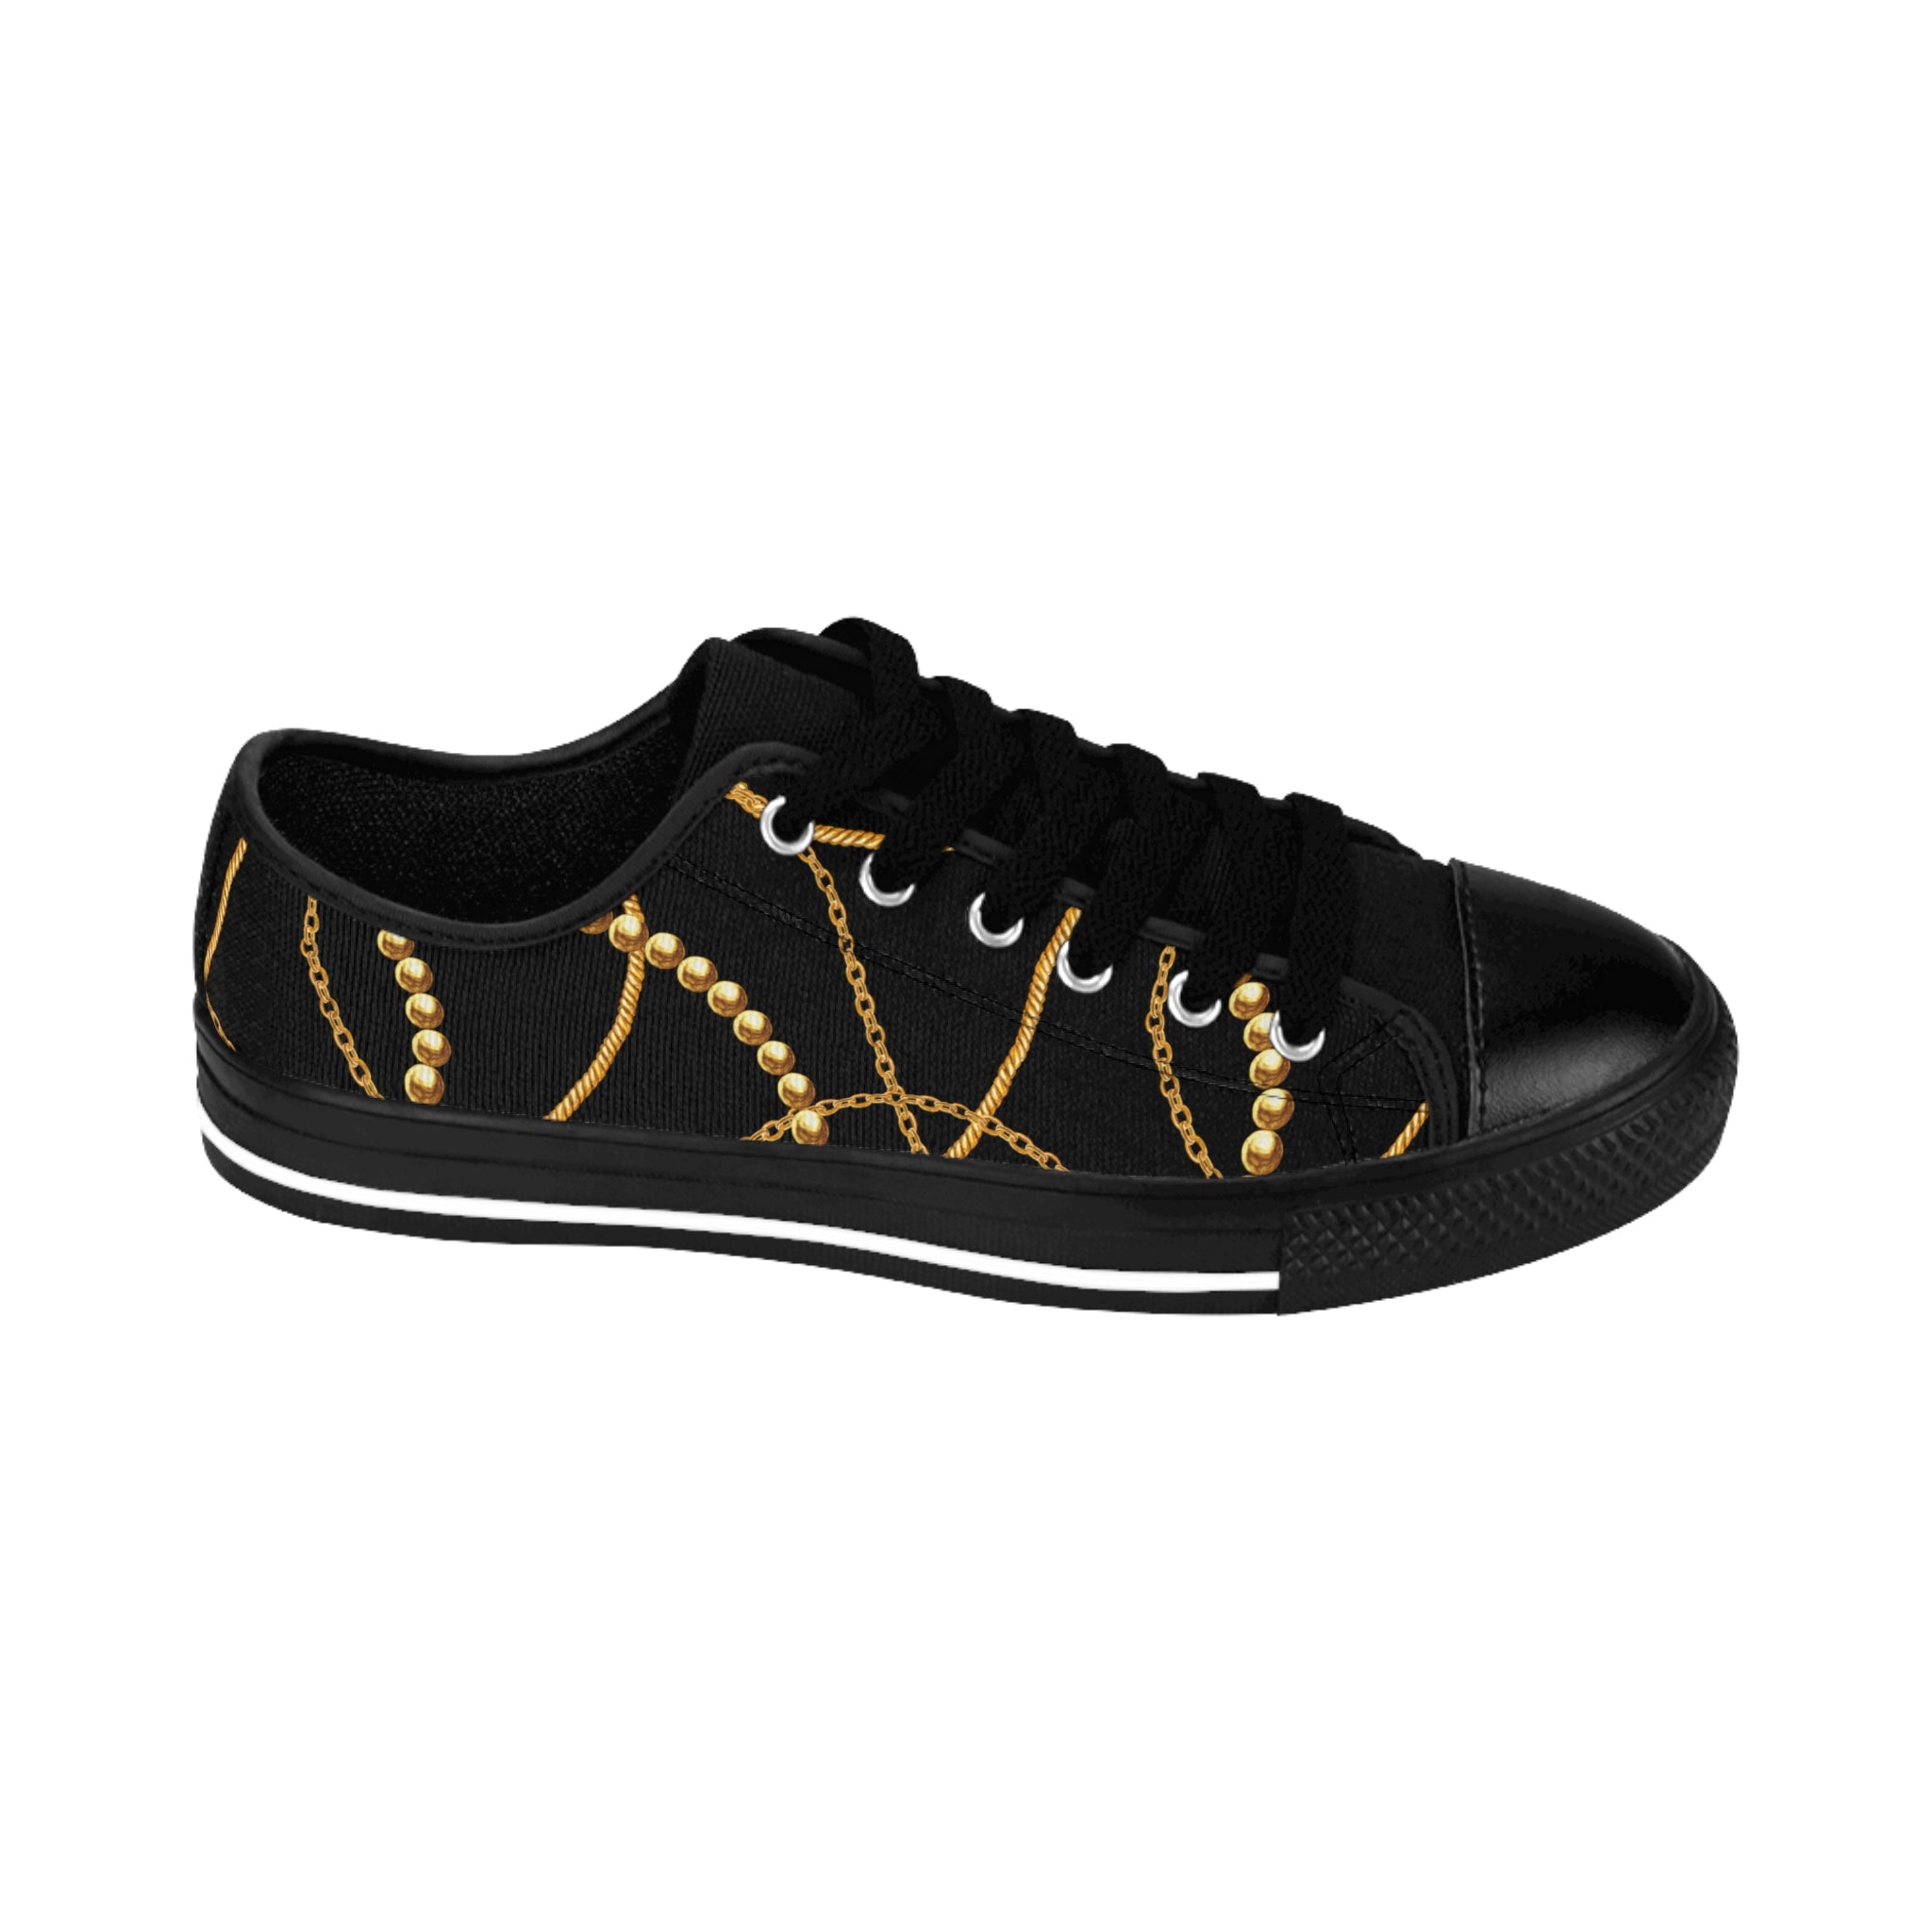 Designer Collection (Chains + Gold Pearls) Black Women's Low Top Canvas Shoes Shoes US-9-Black-sole The Middle Aged Groove